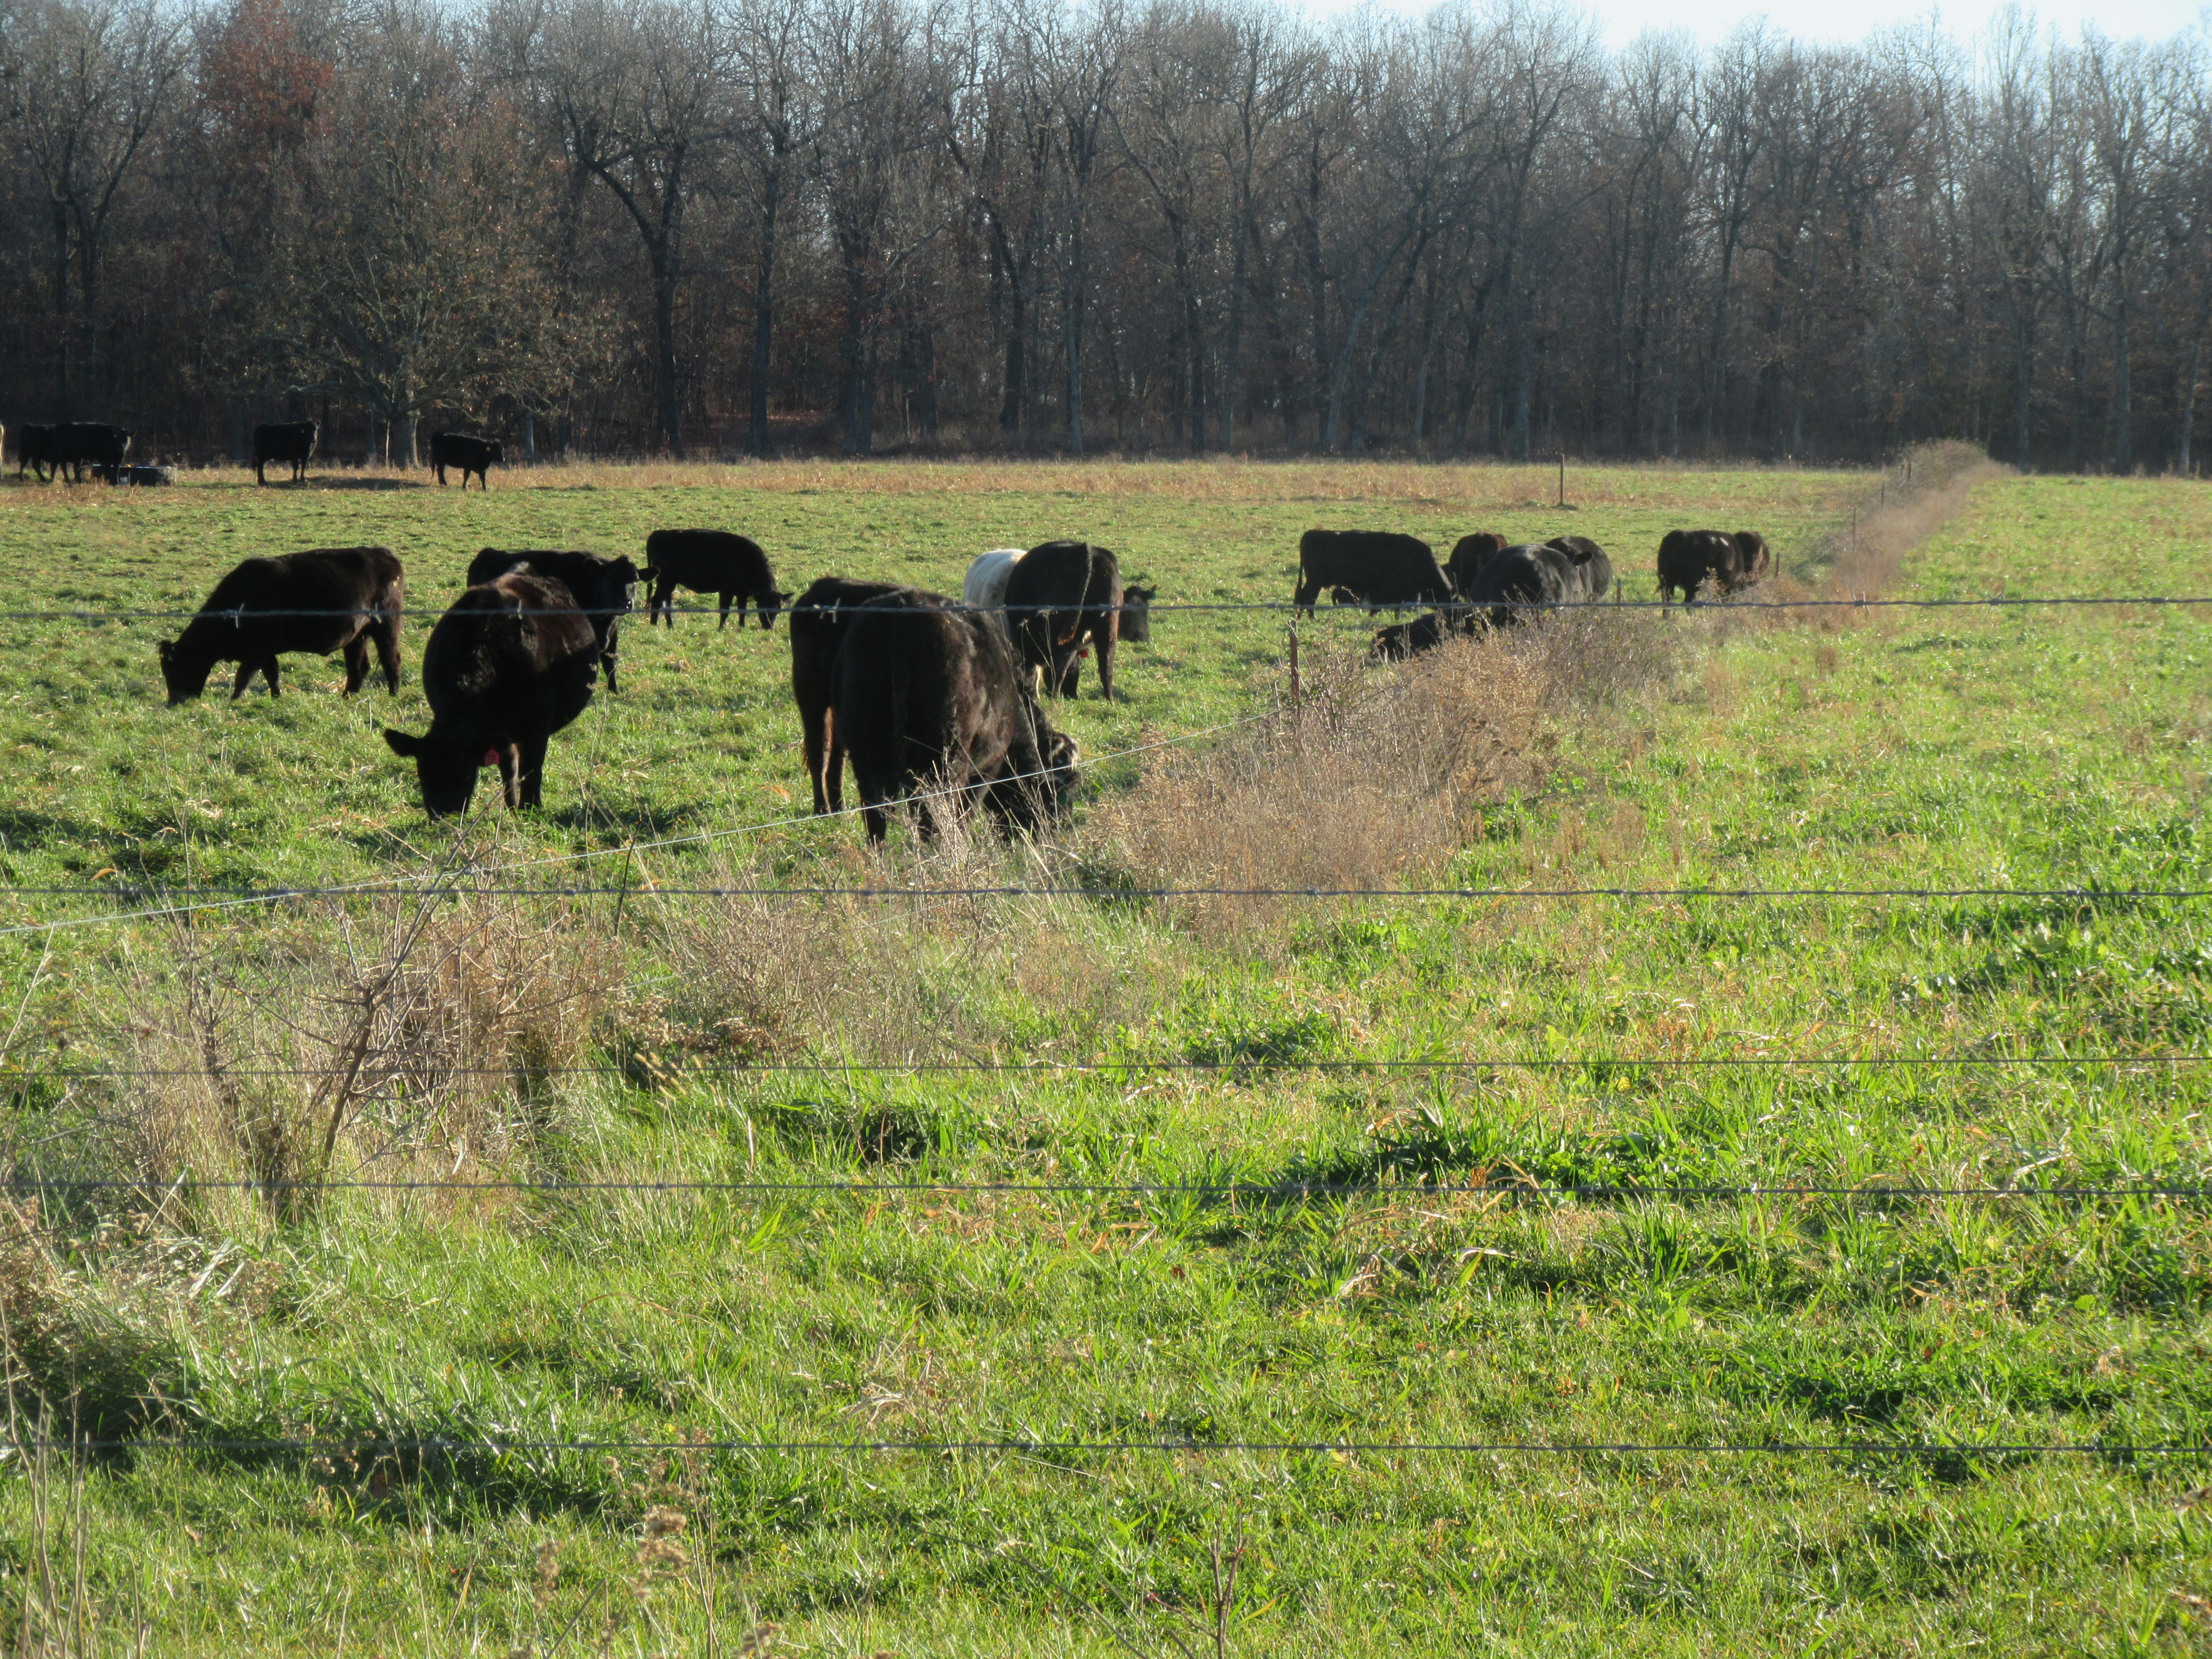 A well-managed rotational grazing system